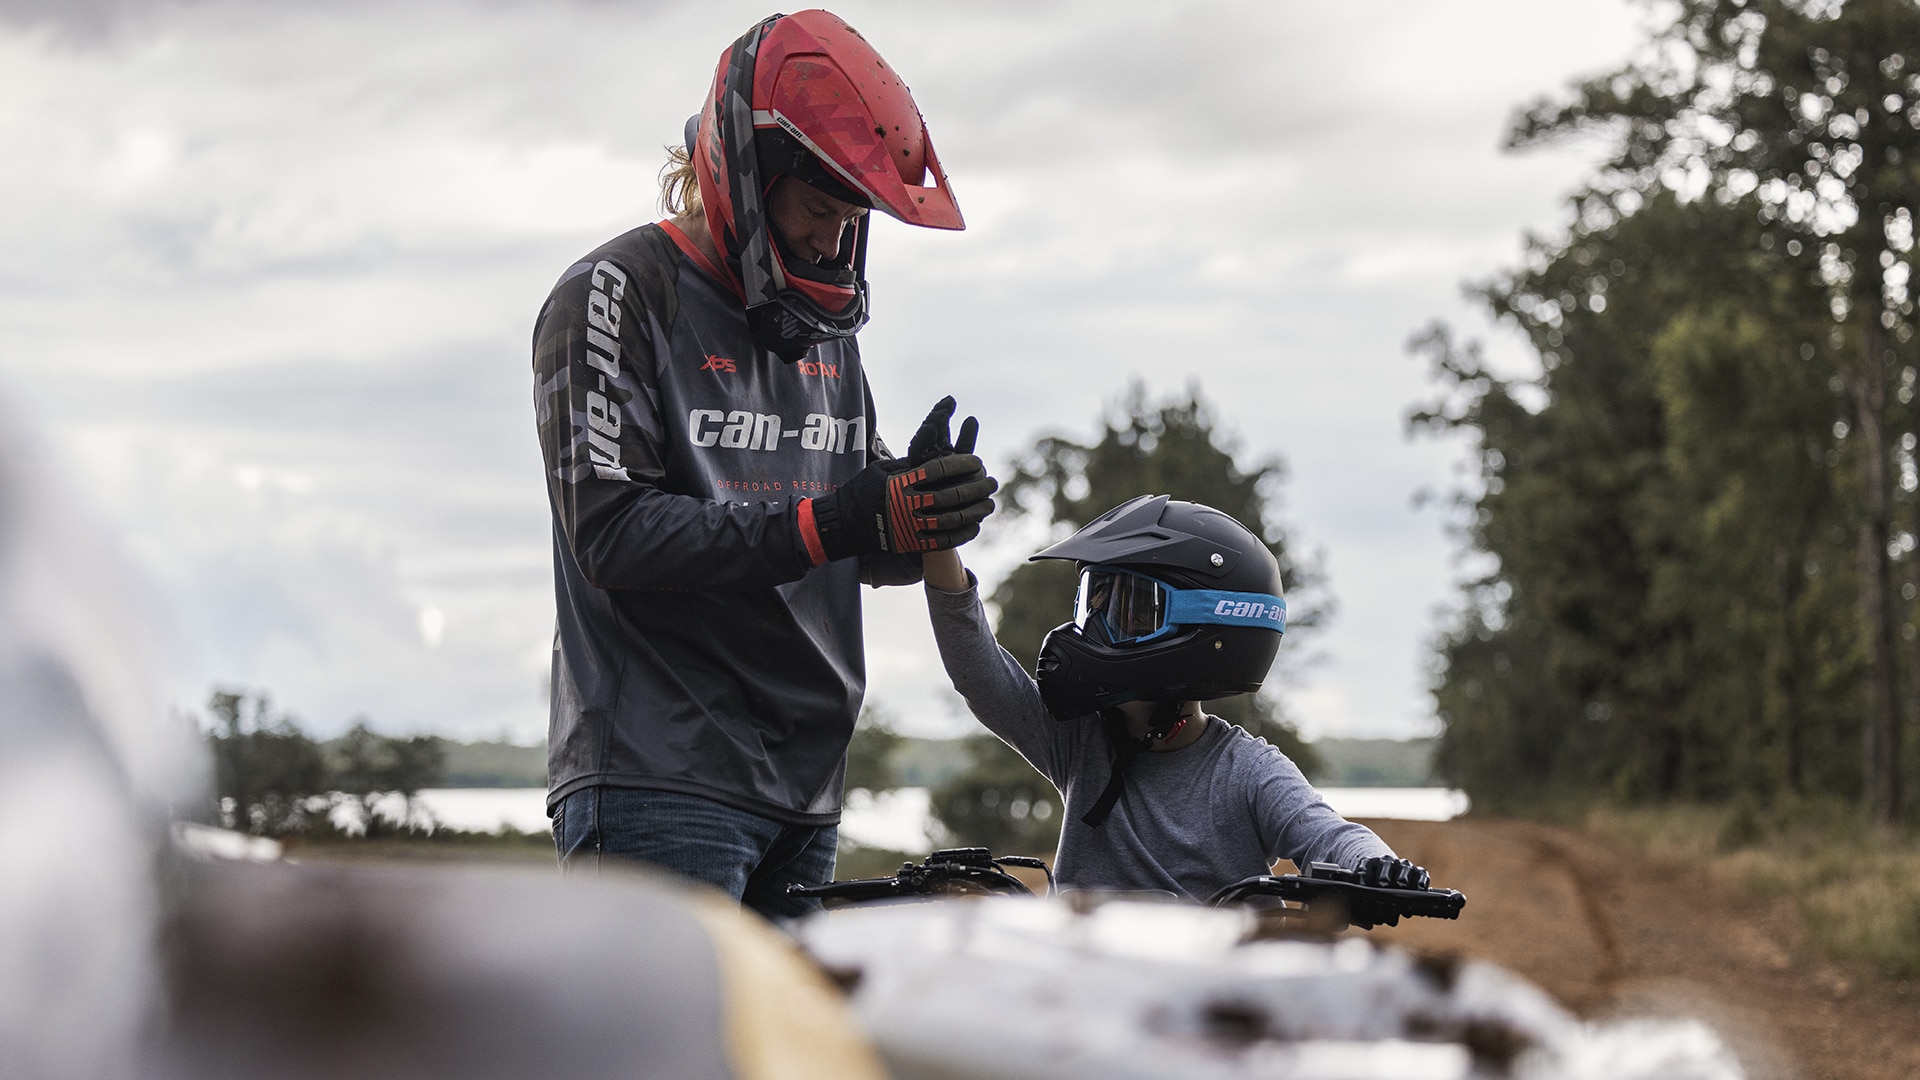 Can-Am Off-Road ambassador Dustin Jones next to his kid sitting on a youth ATV